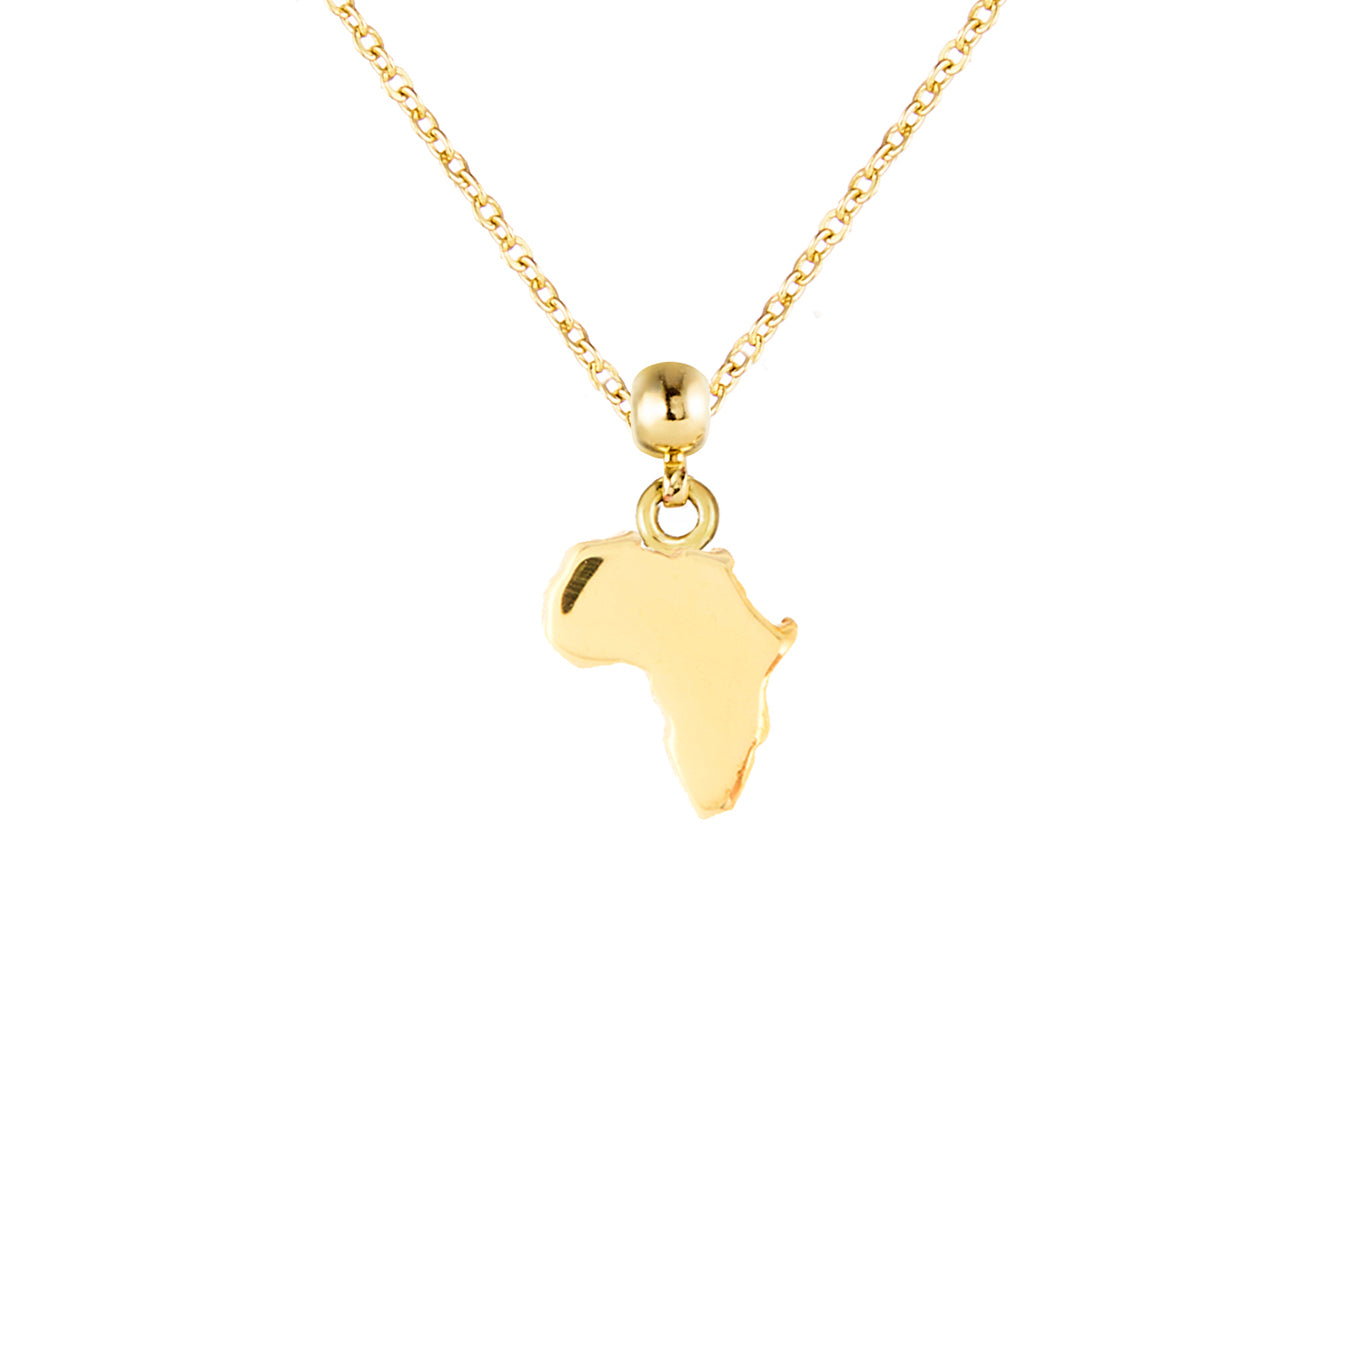 Africa Gold Plated Charm